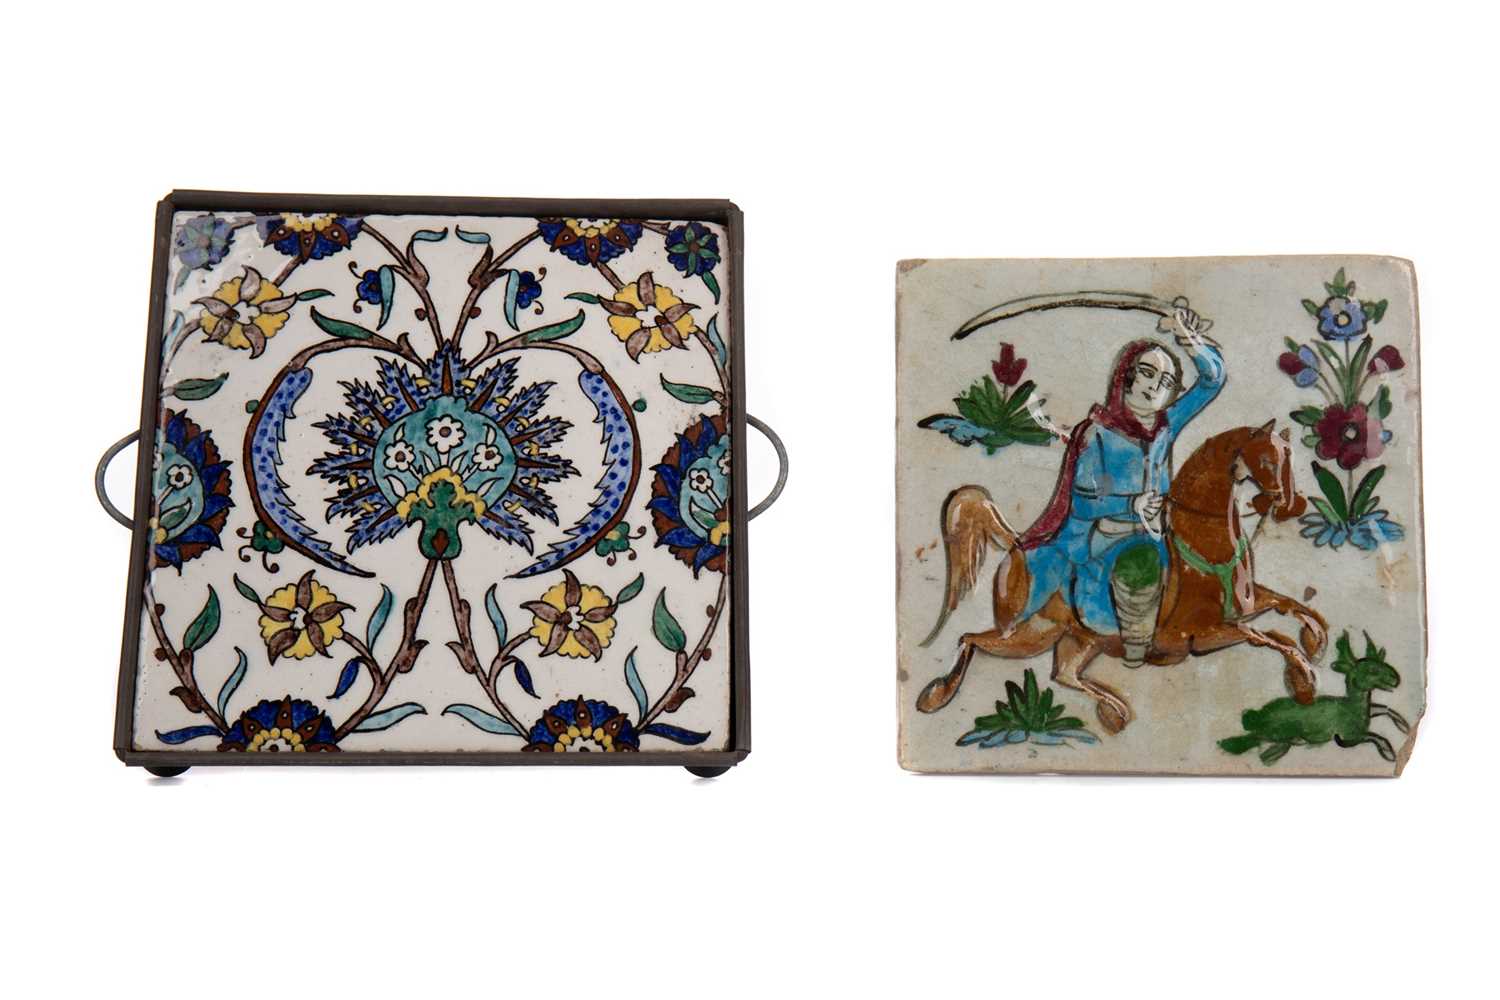 Lot 1813 - AN ISNIK TILE AND ANOTHER TILE